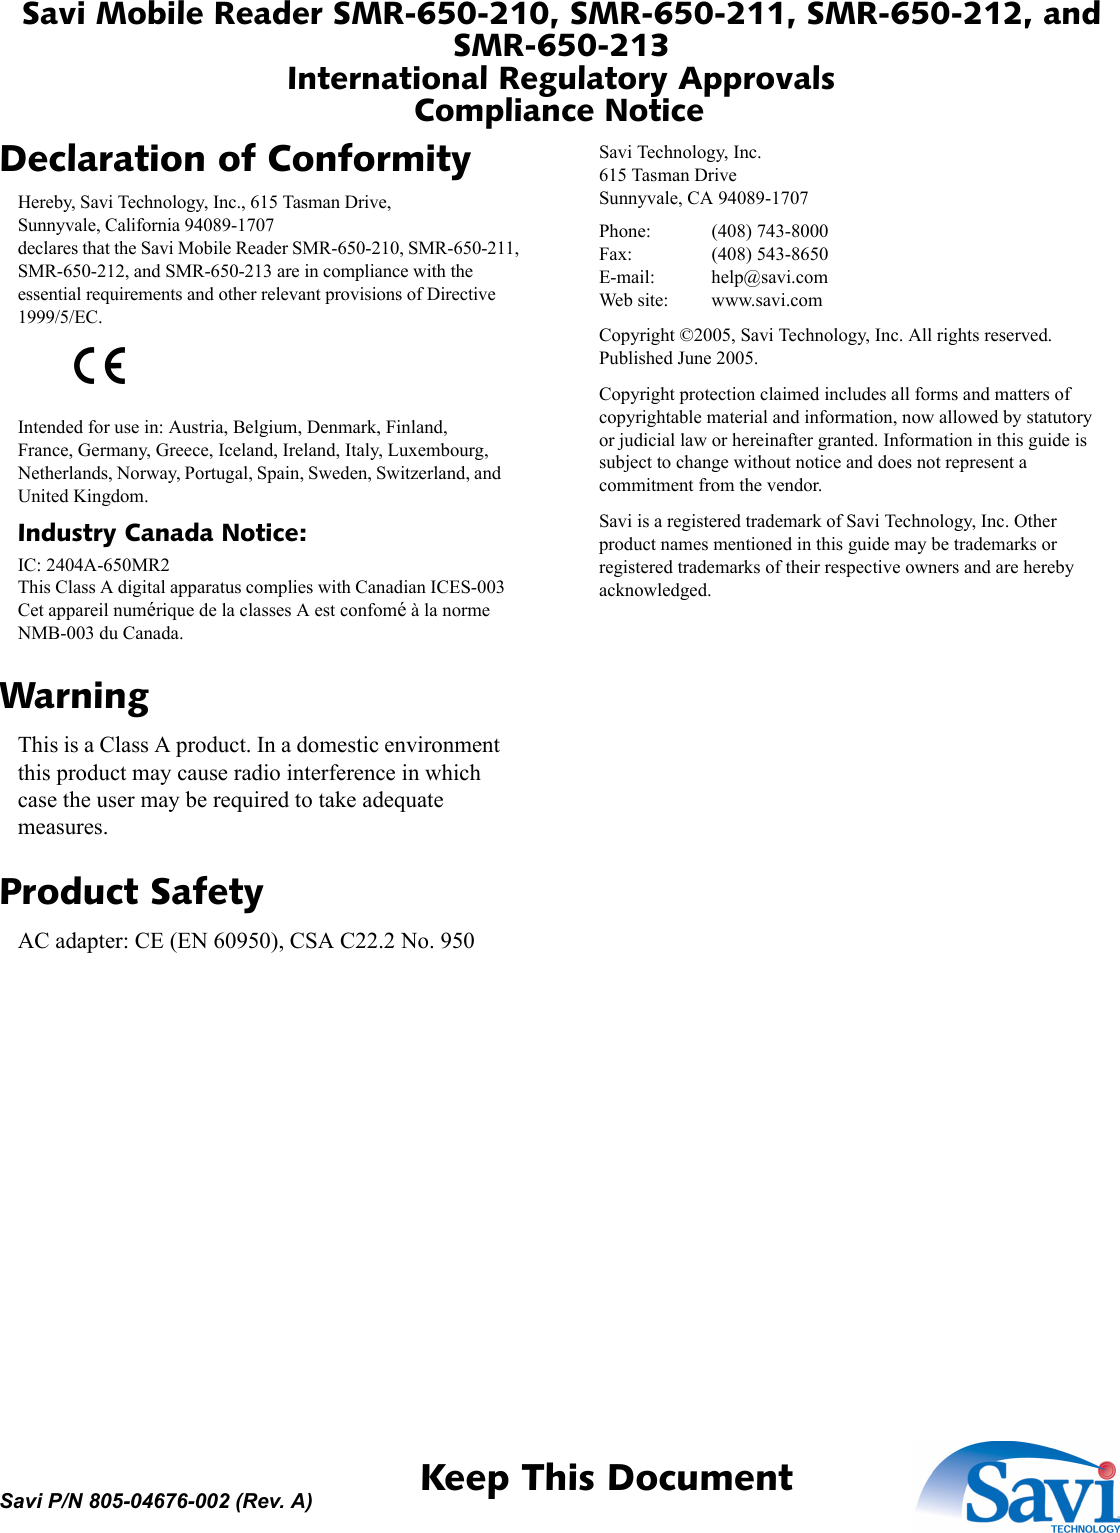 Savi Mobile Reader SMR-650-210, SMR-650-211, SMR-650-212, and SMR-650-213International Regulatory ApprovalsCompliance Notice 1  Keep This DocumentSavi P/N 805-04676-002 (Rev. A)Declaration of ConformityHereby, Savi Technology, Inc., 615 Tasman Drive,Sunnyvale, California 94089-1707declares that the Savi Mobile Reader SMR-650-210, SMR-650-211, SMR-650-212, and SMR-650-213 are in compliance with the essential requirements and other relevant provisions of Directive 1999/5/EC.Intended for use in: Austria, Belgium, Denmark, Finland, France, Germany, Greece, Iceland, Ireland, Italy, Luxembourg, Netherlands, Norway, Portugal, Spain, Sweden, Switzerland, and United Kingdom.Industry Canada Notice:IC: 2404A-650MR2This Class A digital apparatus complies with Canadian ICES-003Cet appareil numérique de la classes A est confomé à la norme NMB-003 du Canada.WarningThis is a Class A product. In a domestic environment this product may cause radio interference in which case the user may be required to take adequate measures.Product SafetyAC adapter: CE (EN 60950), CSA C22.2 No. 950Savi Technology, Inc.615 Tasman DriveSunnyvale, CA 94089-1707Phone: (408) 743-8000Fax: (408) 543-8650E-mail: help@savi.comWeb site: www.savi.comCopyright ©2005, Savi Technology, Inc. All rights reserved. Published June 2005.Copyright protection claimed includes all forms and matters of copyrightable material and information, now allowed by statutory or judicial law or hereinafter granted. Information in this guide is subject to change without notice and does not represent a commitment from the vendor.Savi is a registered trademark of Savi Technology, Inc. Other product names mentioned in this guide may be trademarks or registered trademarks of their respective owners and are hereby acknowledged.